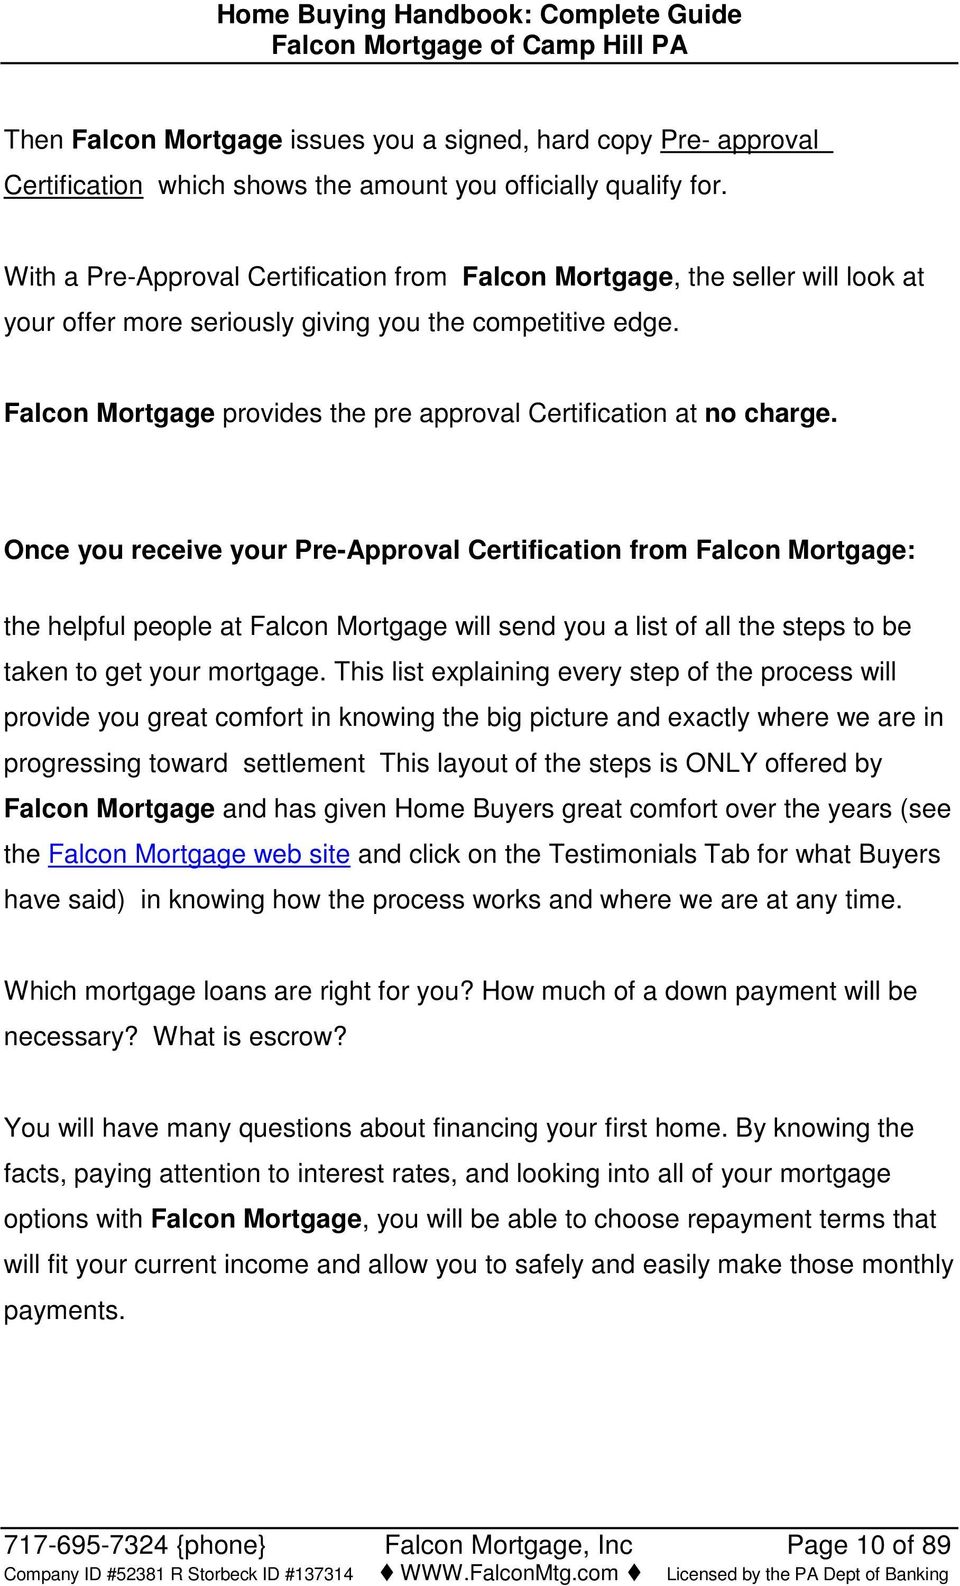 Falcon Mortgage provides the pre approval Certification at no charge.